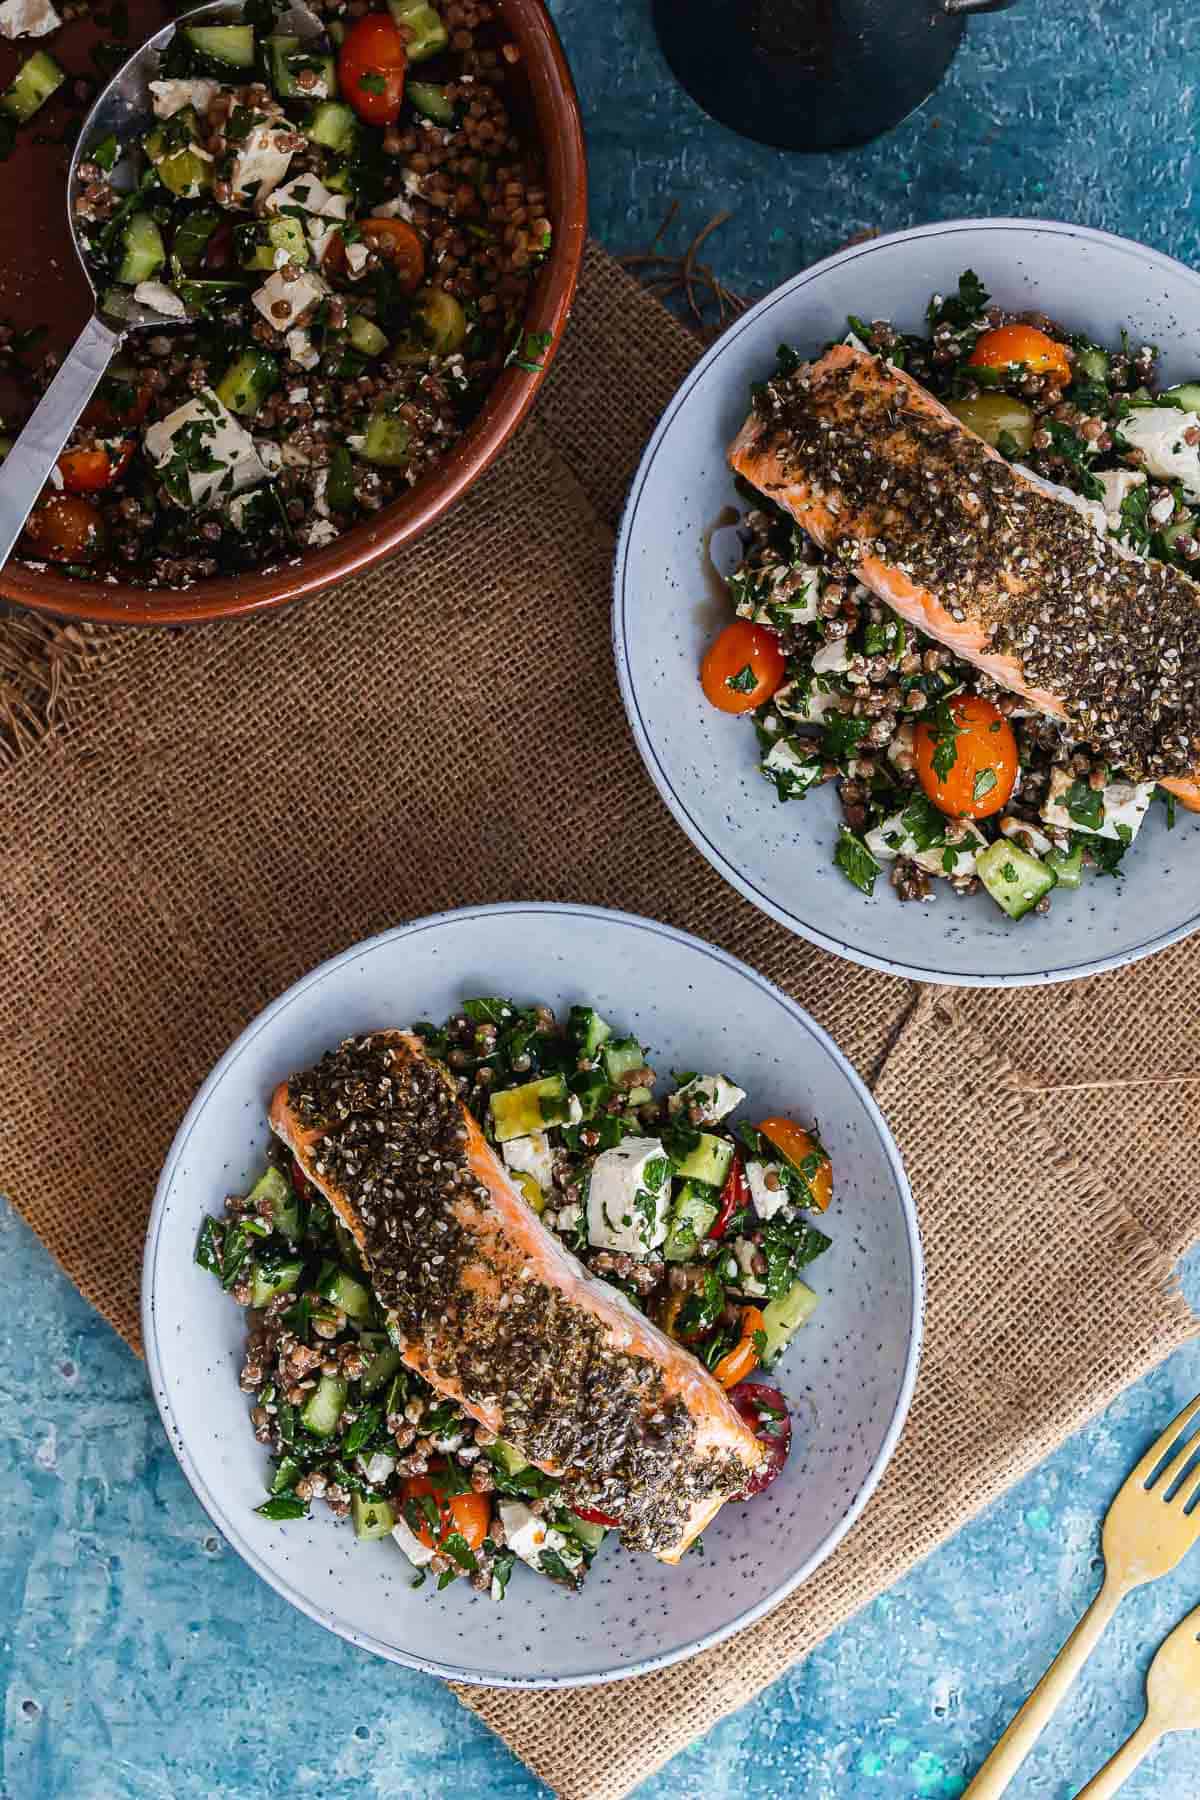 Overhead shot of salmon and couscous on a woven mat